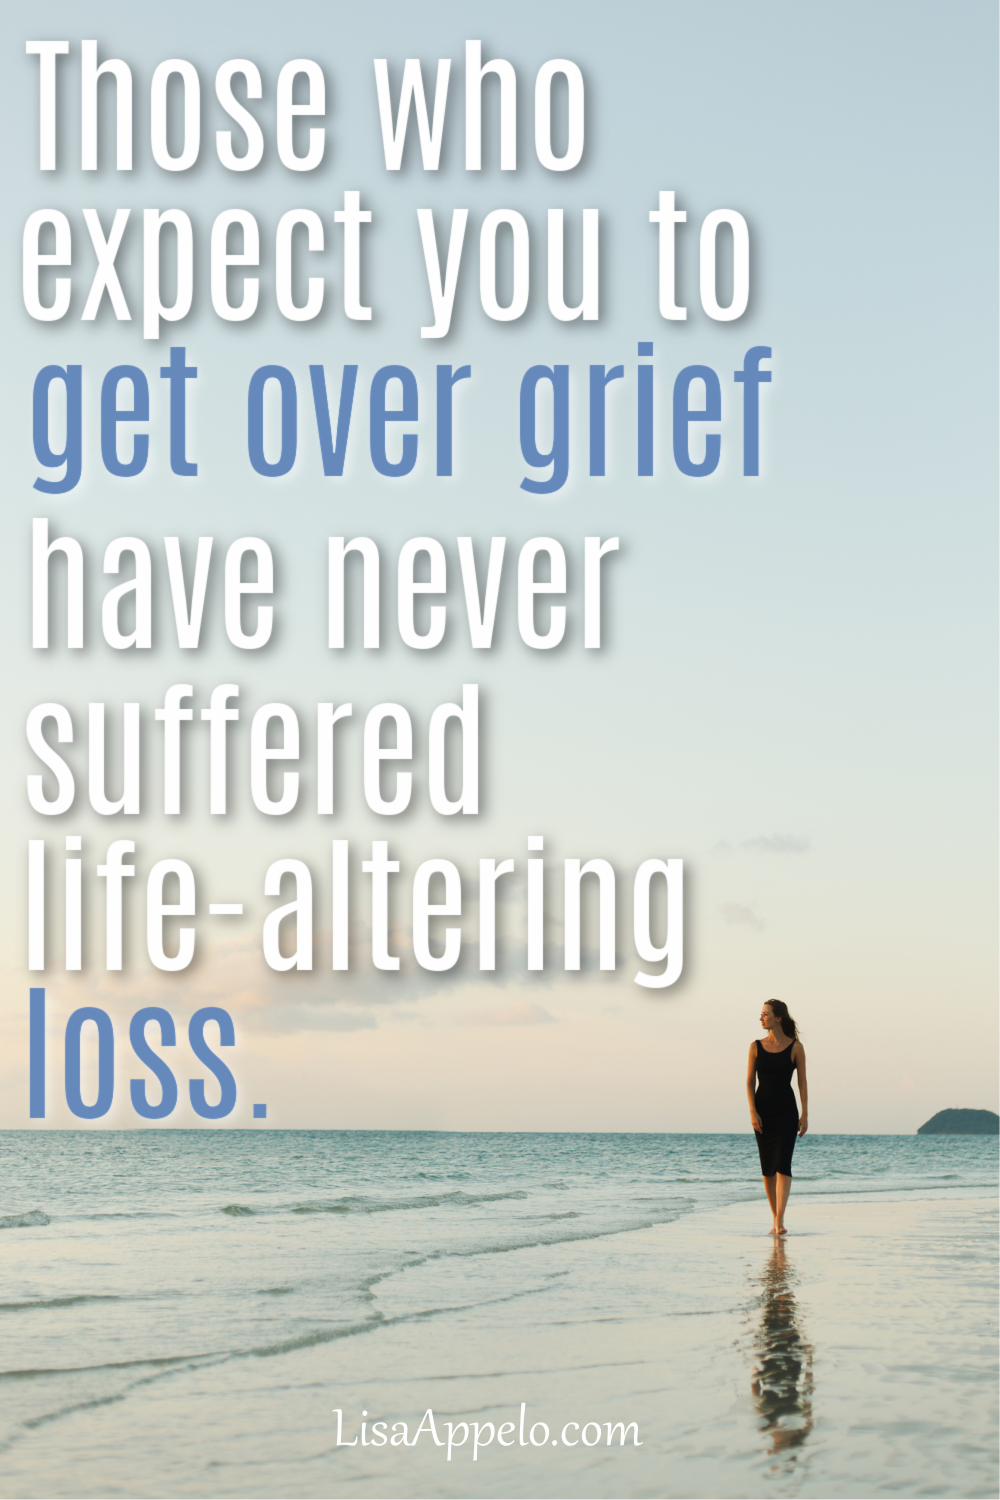 Those Who Expect You to Get Over Grief Have Never Suffered Life-altering Loss